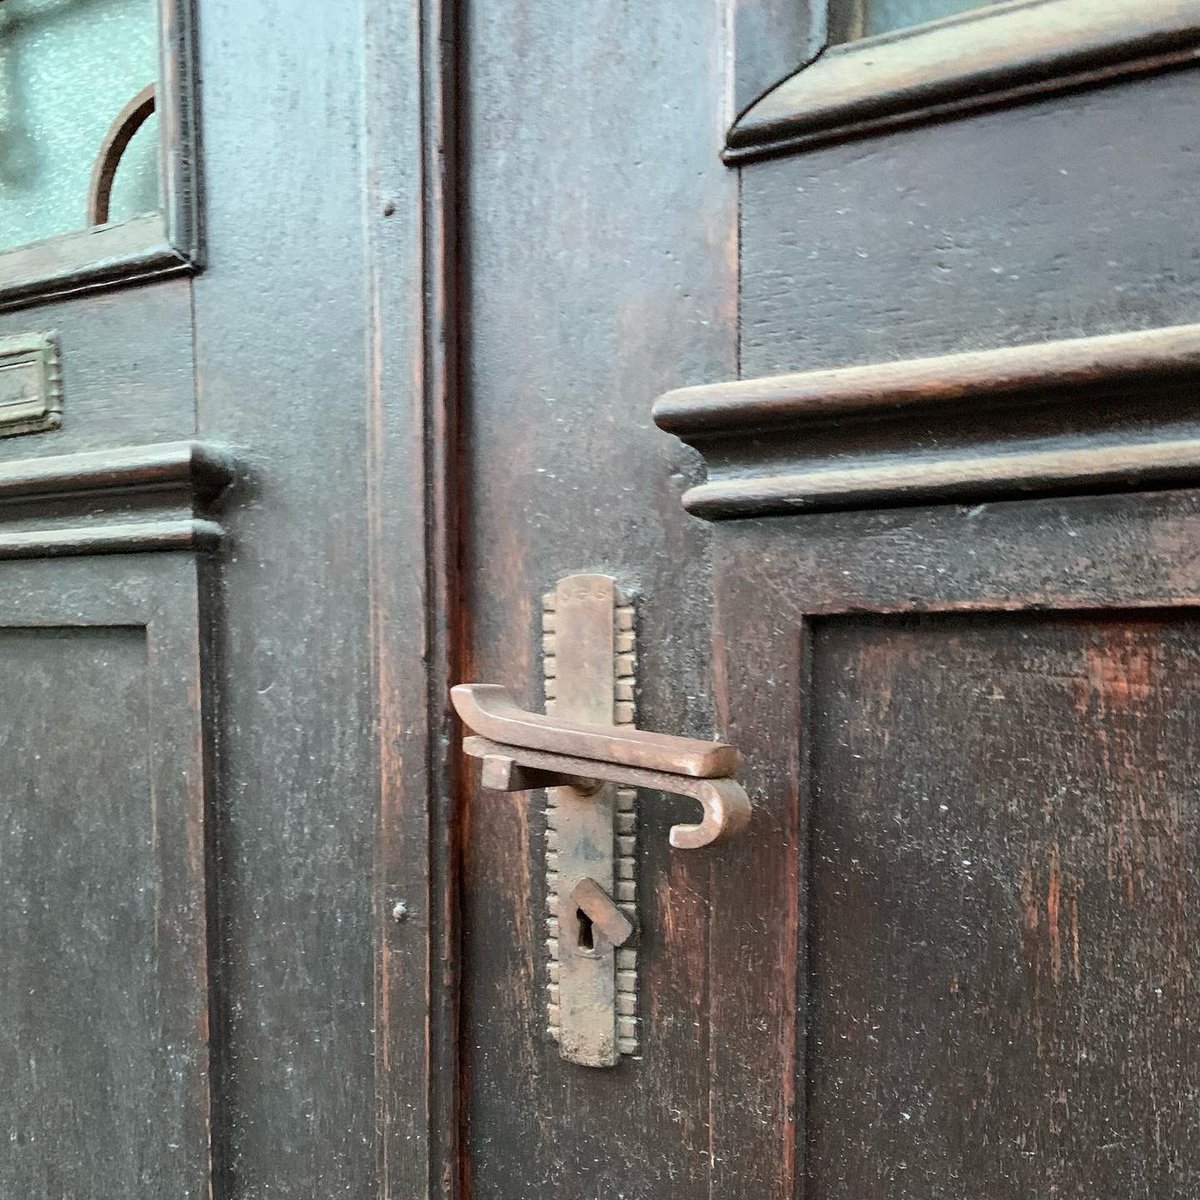 Early Art Deco in Brasov/ Kronstadt, seen in the design of a door, which reminds me more of the Dutch Expressionism rather than Art Deco. It is quite a rare occurrence in this part of Europe. #artdeco #expressionism #dutchexpressionism #door #brasov #kronstadt #saxontransylvania